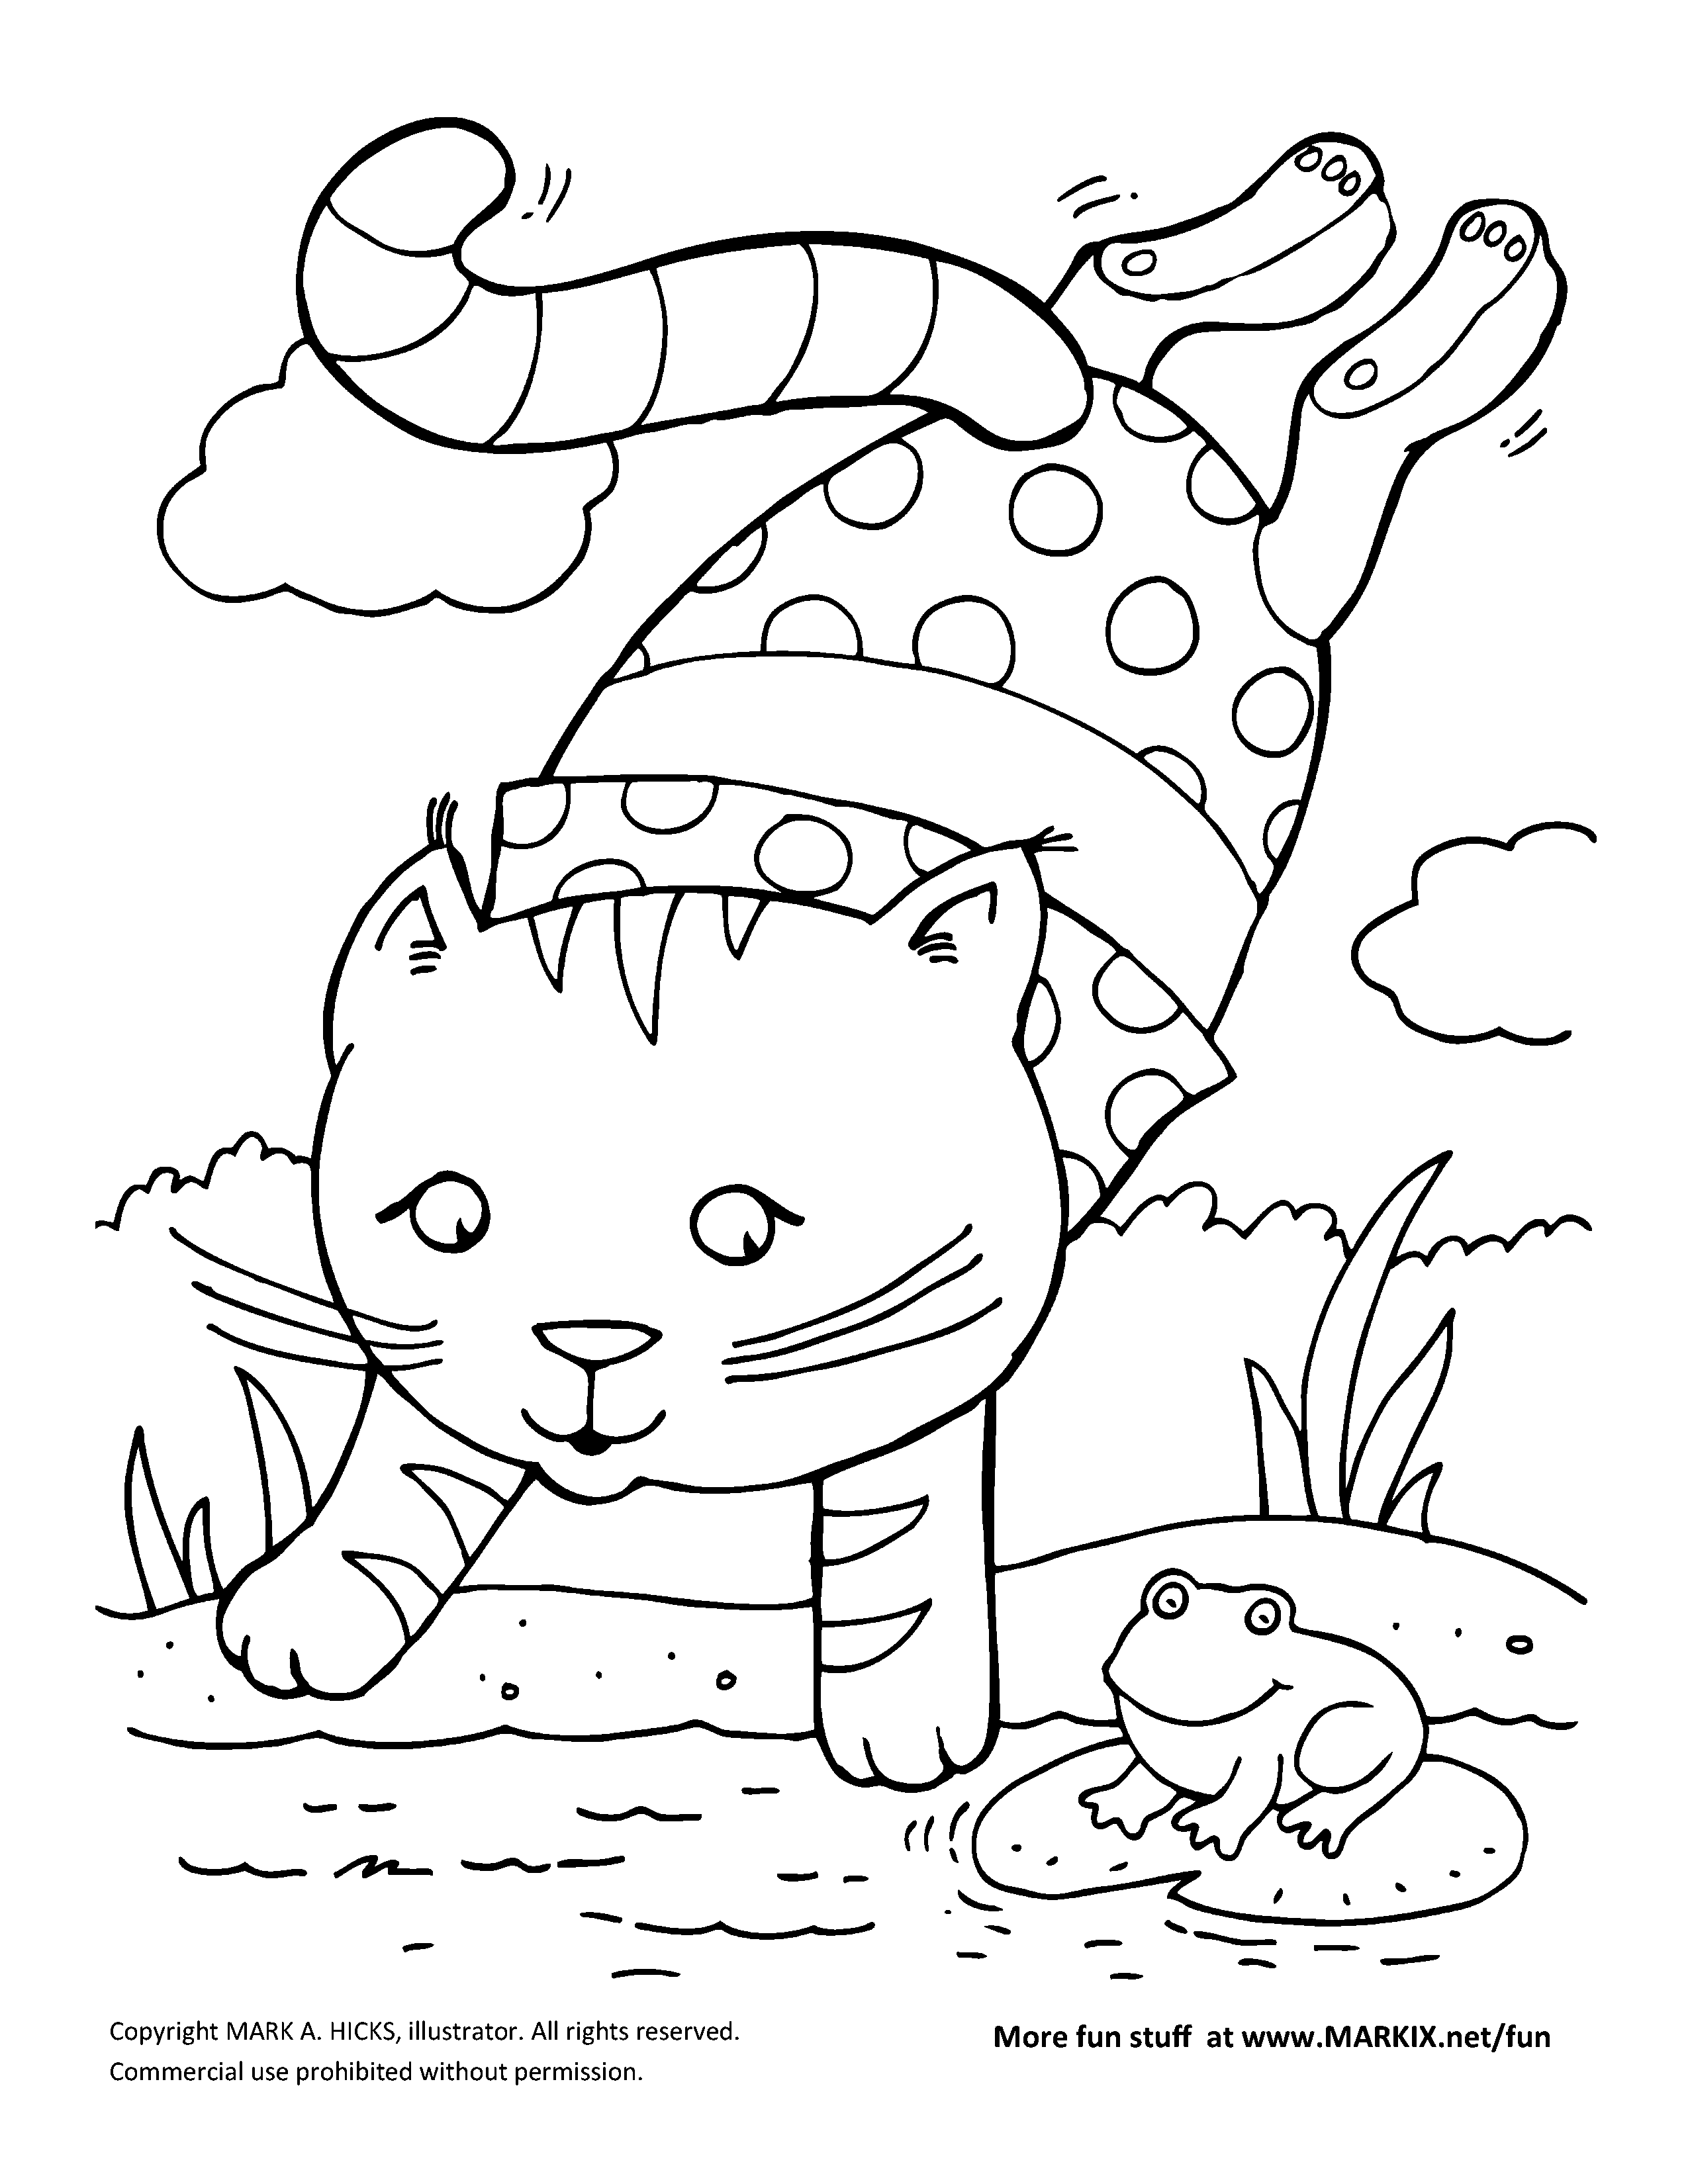 Summer Fun Diving Kitty Coloring Page in a pond with a frog